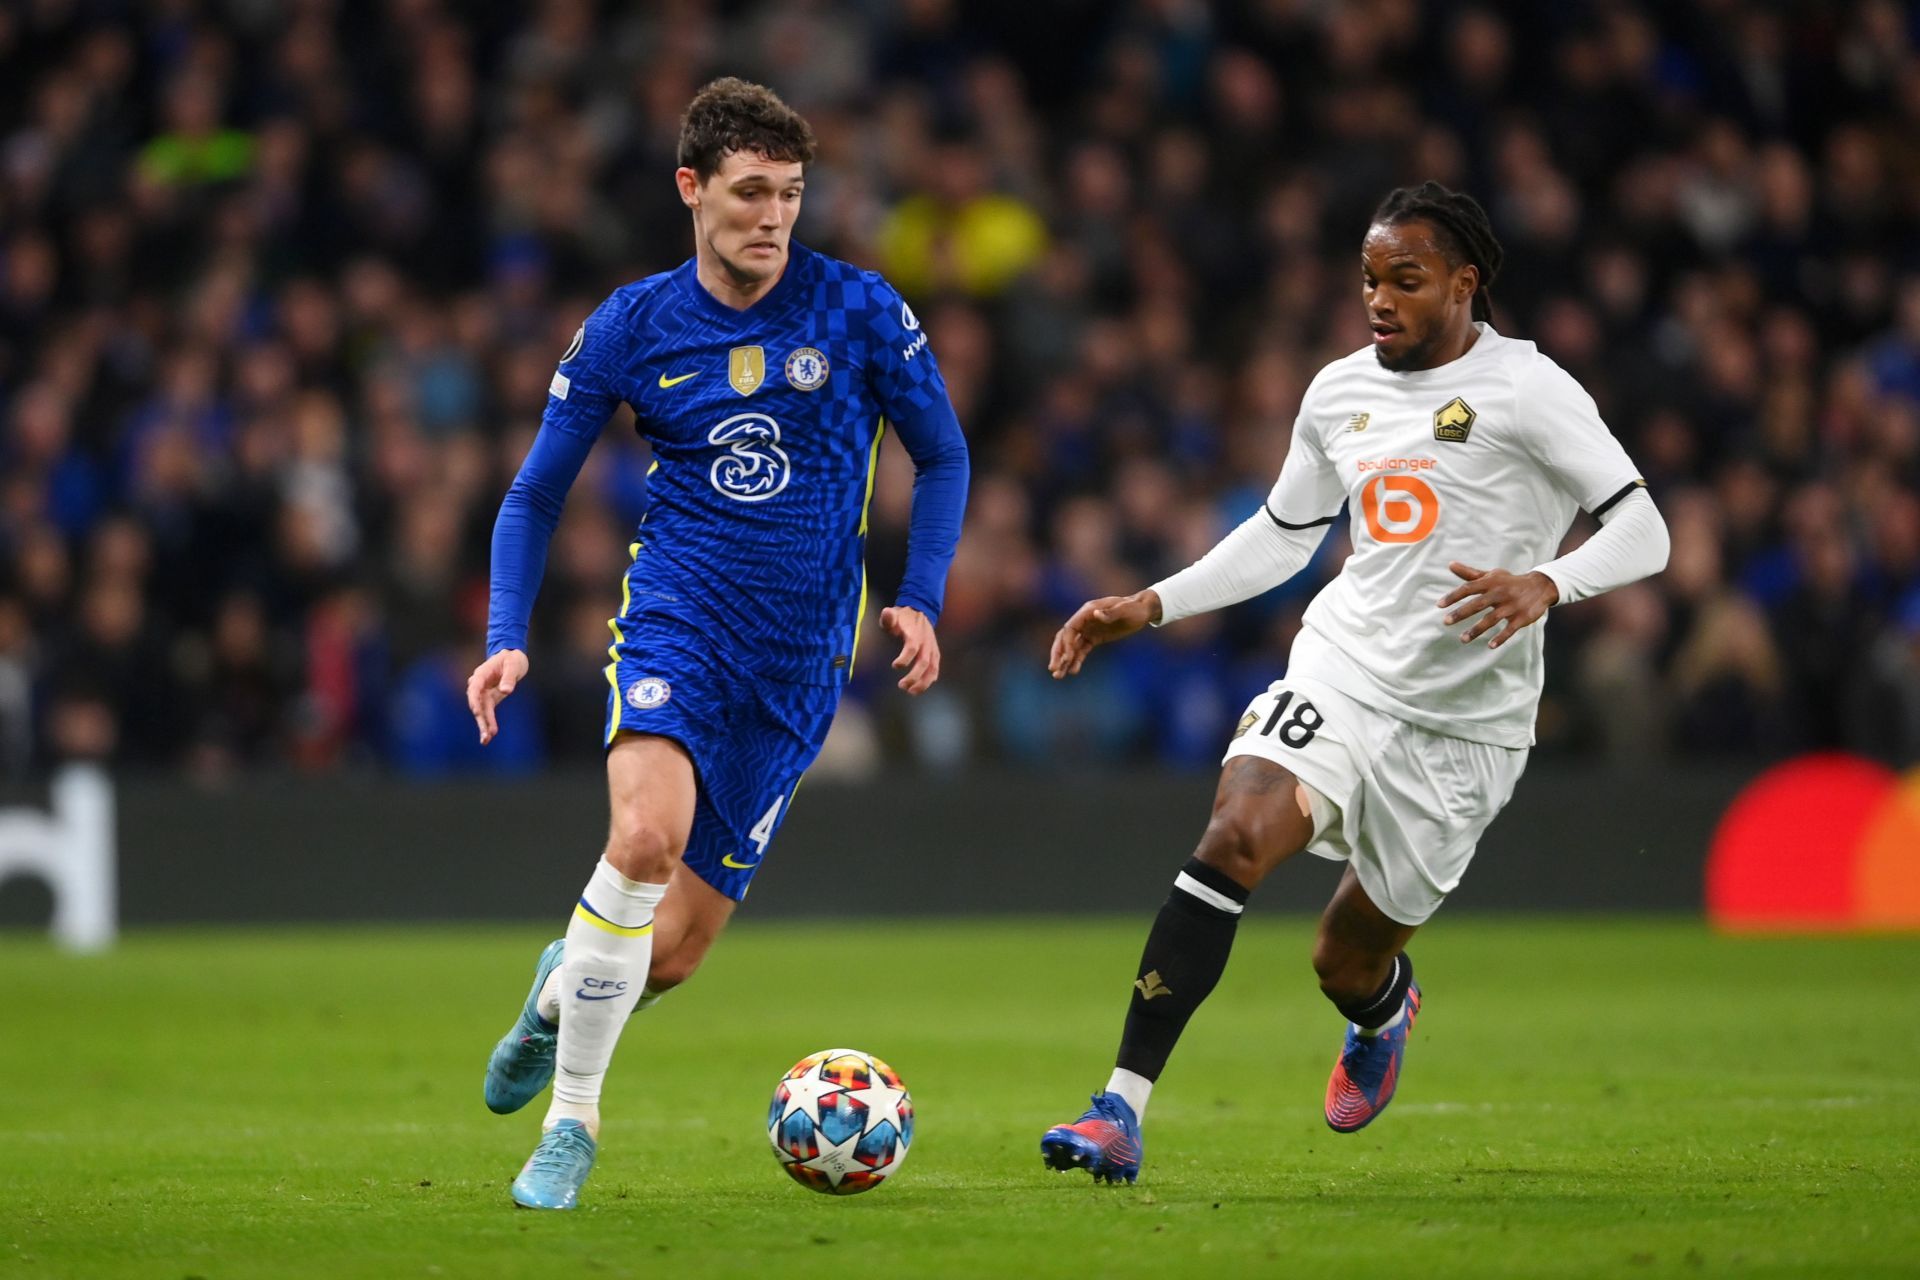 Andreas Christensen (left) will ply his trade at the Camp Nou next season.